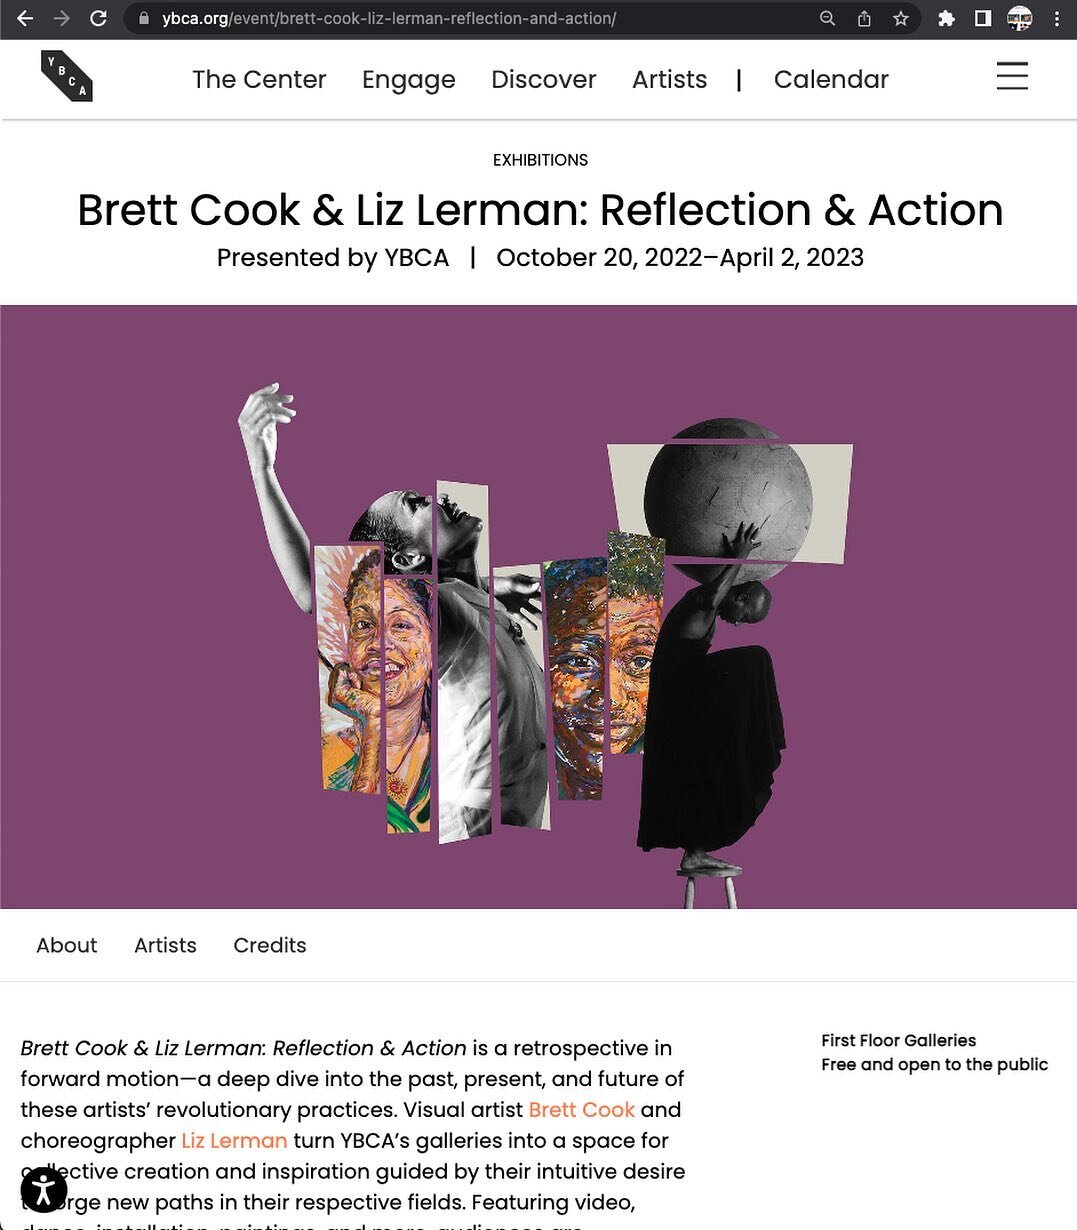 CLIENT SPOTLIGHT: YBCA (YERBA BUENA CENTER OF THE ARTS)
SECTOR: ARTS
PROJECT:  PRINT, WEB, EXHIBIT AND INTERIOR DESIGN. 

SDG is proud to have partnered with YBCA to develop the brand, marketing and exhibit design for the Brett Cook &amp; Liz Lerman: